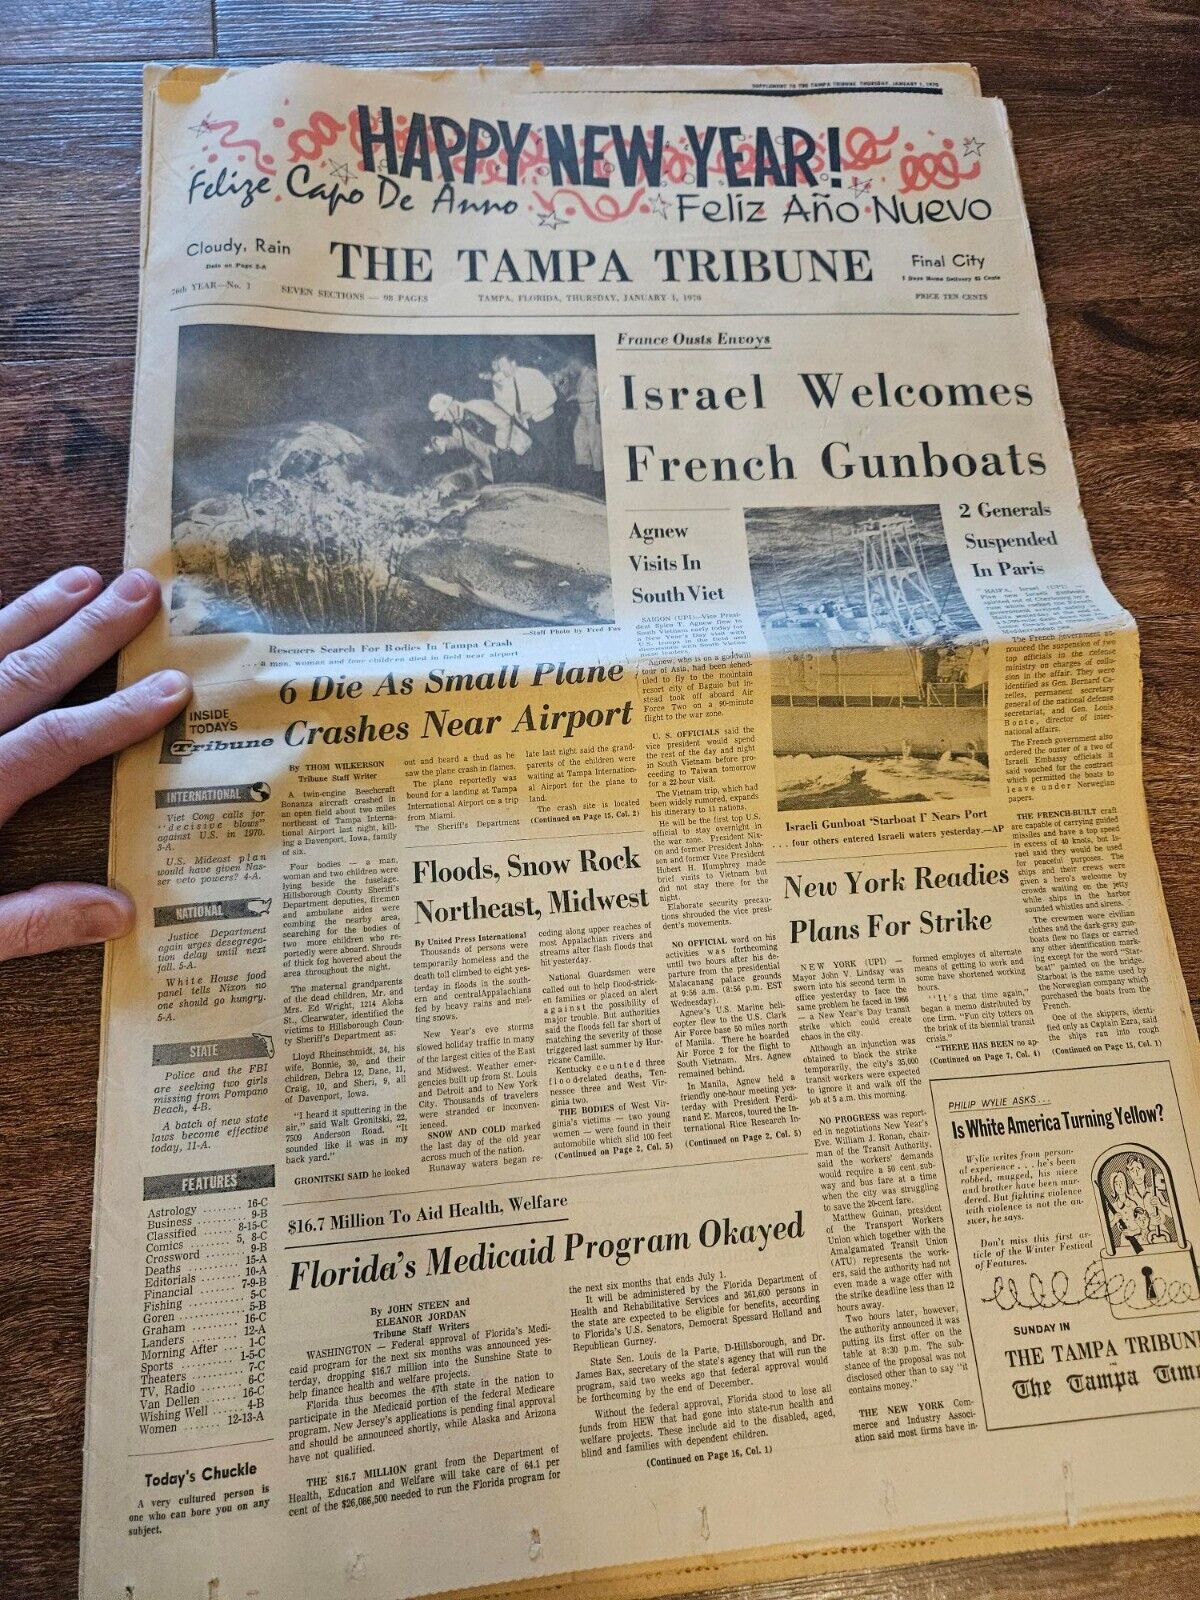 The Tampa Tribune Thursday January 1, 1970 Happy New Year Full Newspaper Sports